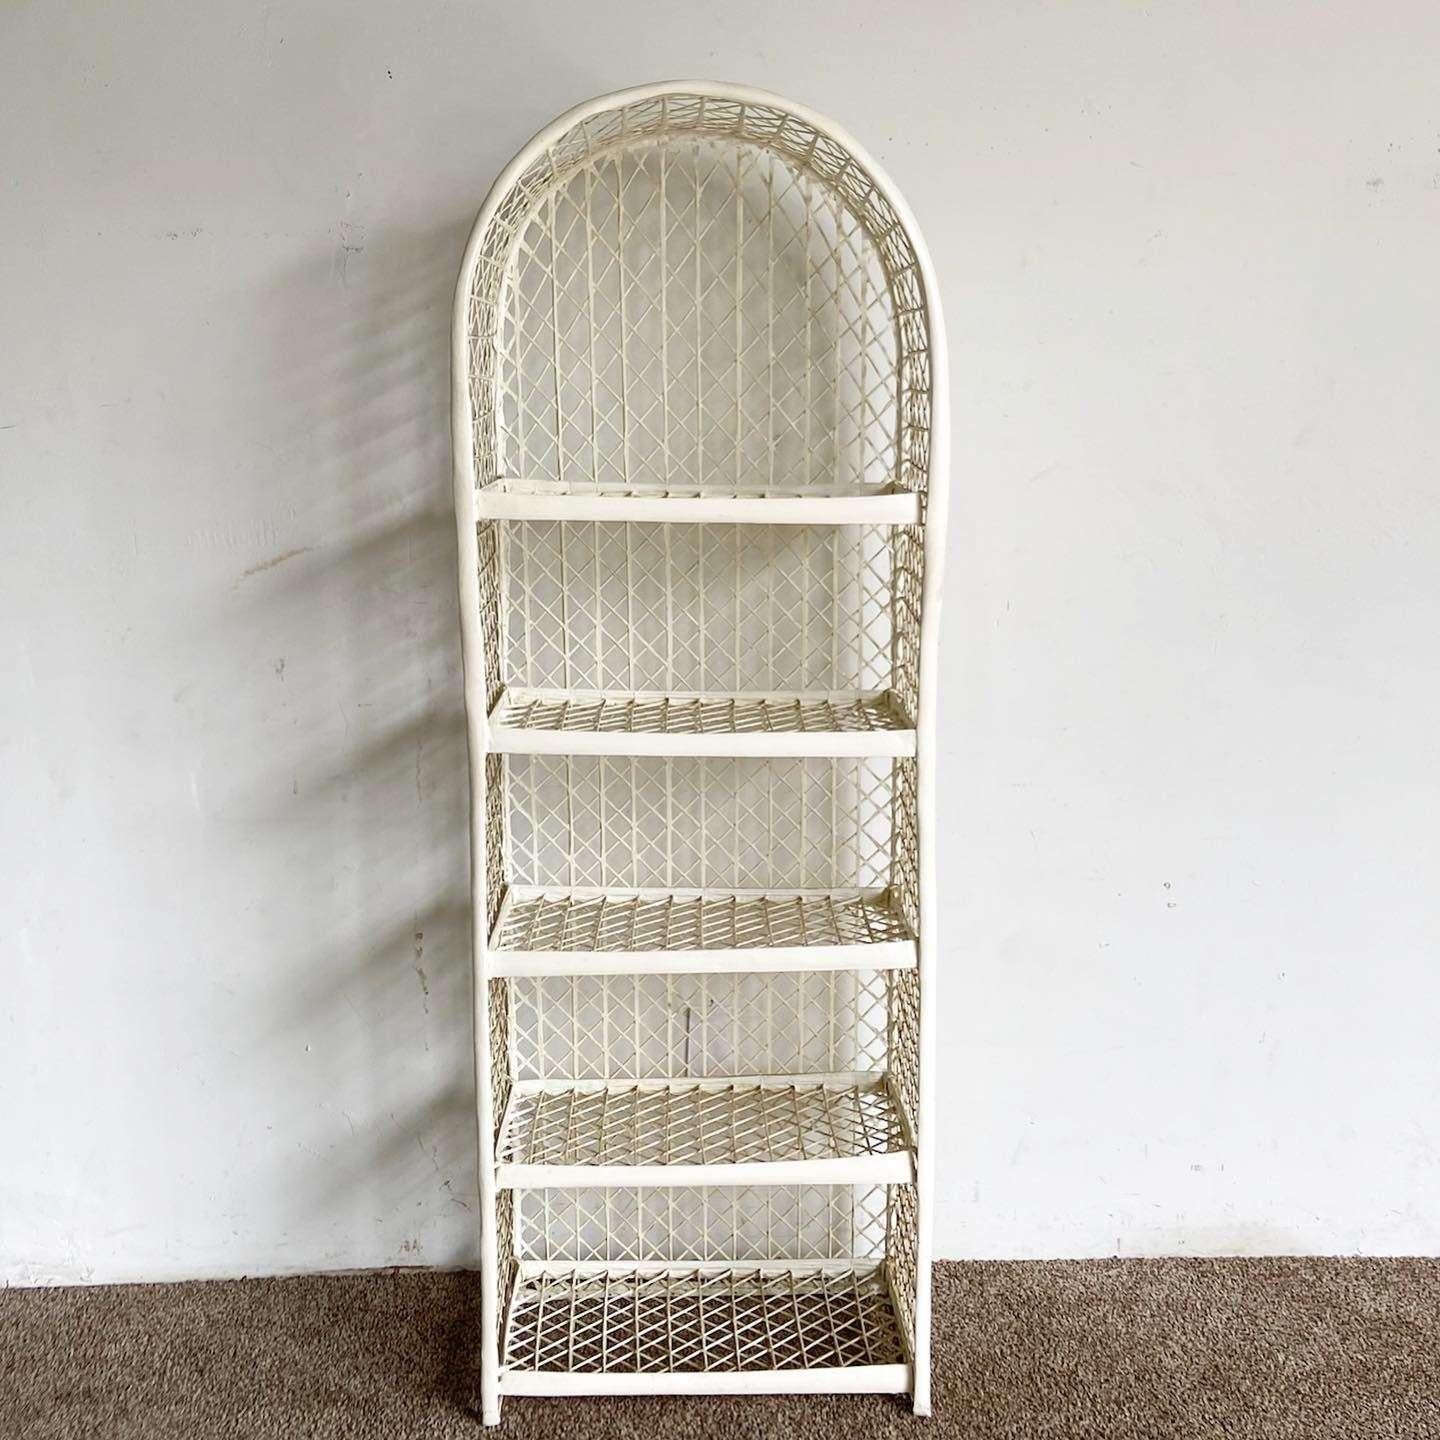 Elevate your space with this wonderful vintage mid century modern Etagere by Russell Woodard. The spun fiberglass construction in an off-white finish and 5 spacious shelves make it a stylish and functional bookshelf.

Vintage mid century modern